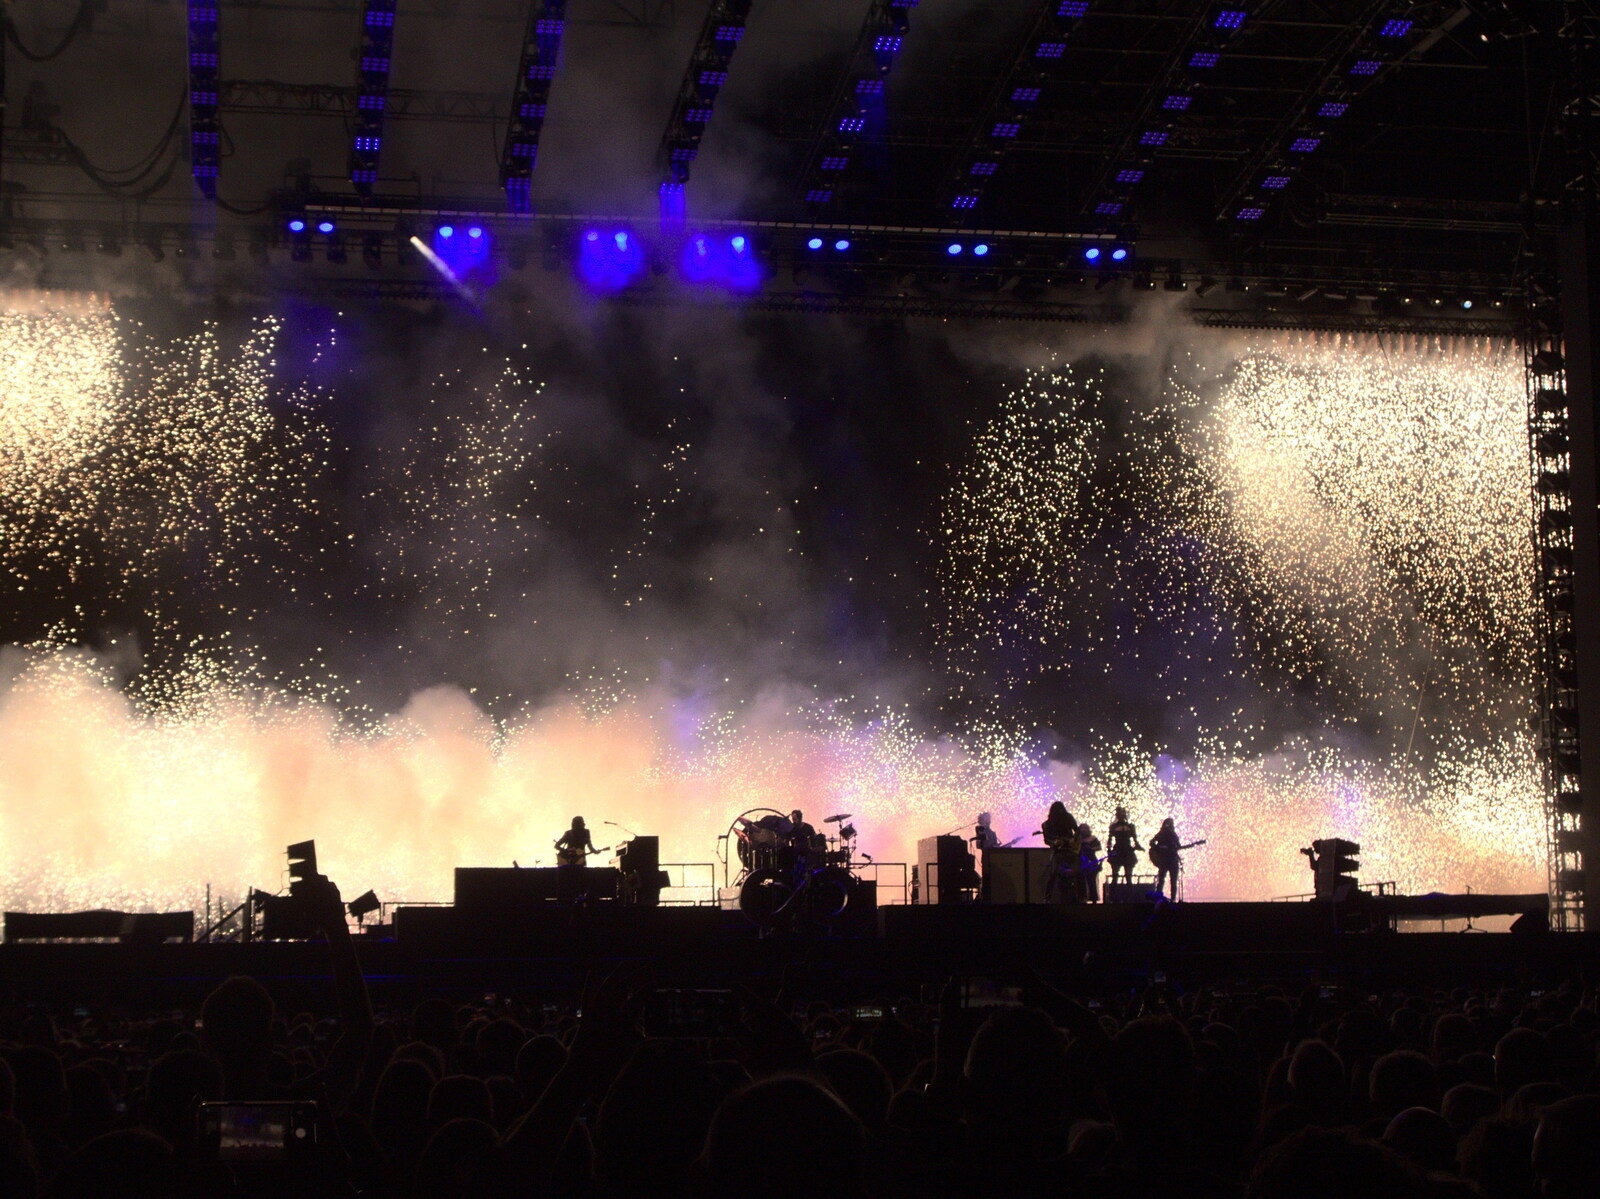 The Killers at Carrow Road, Norwich, Norfolk - 9th June 2022: There's a wall of pyrotechnics